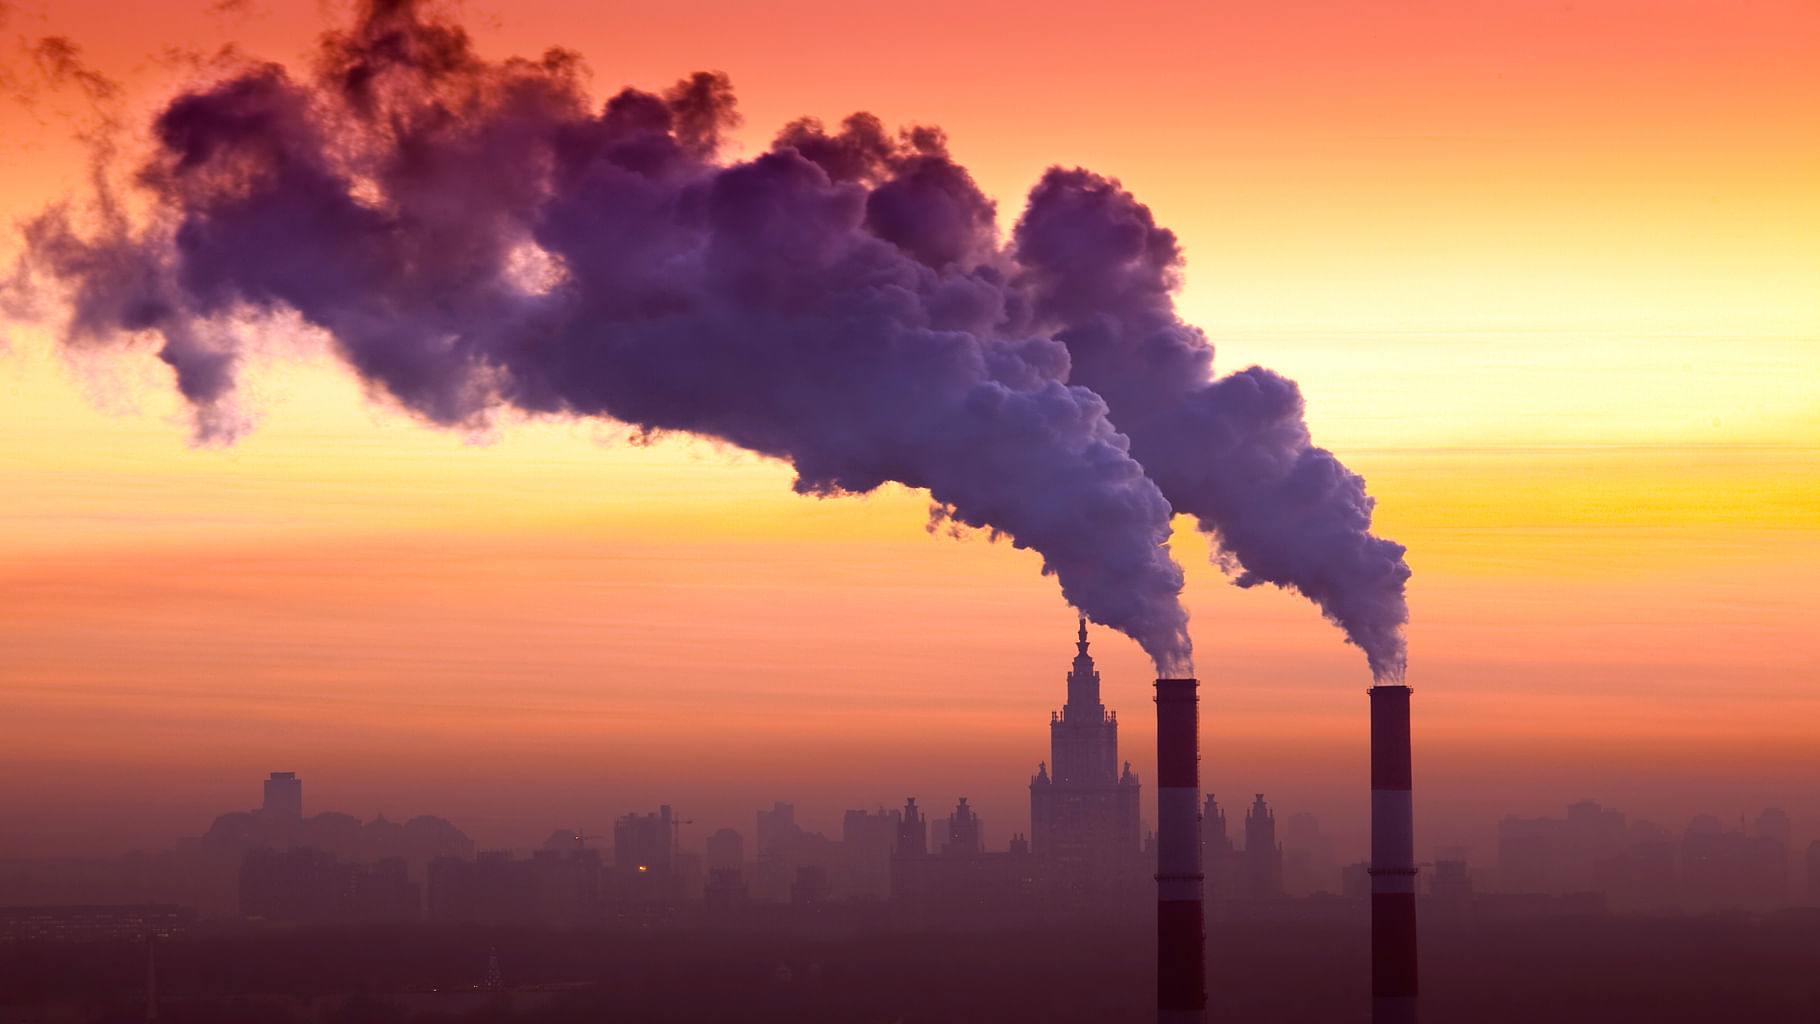 Winter cityscape with steam emissions and industrial pollution. (Photo: iStockphoto)